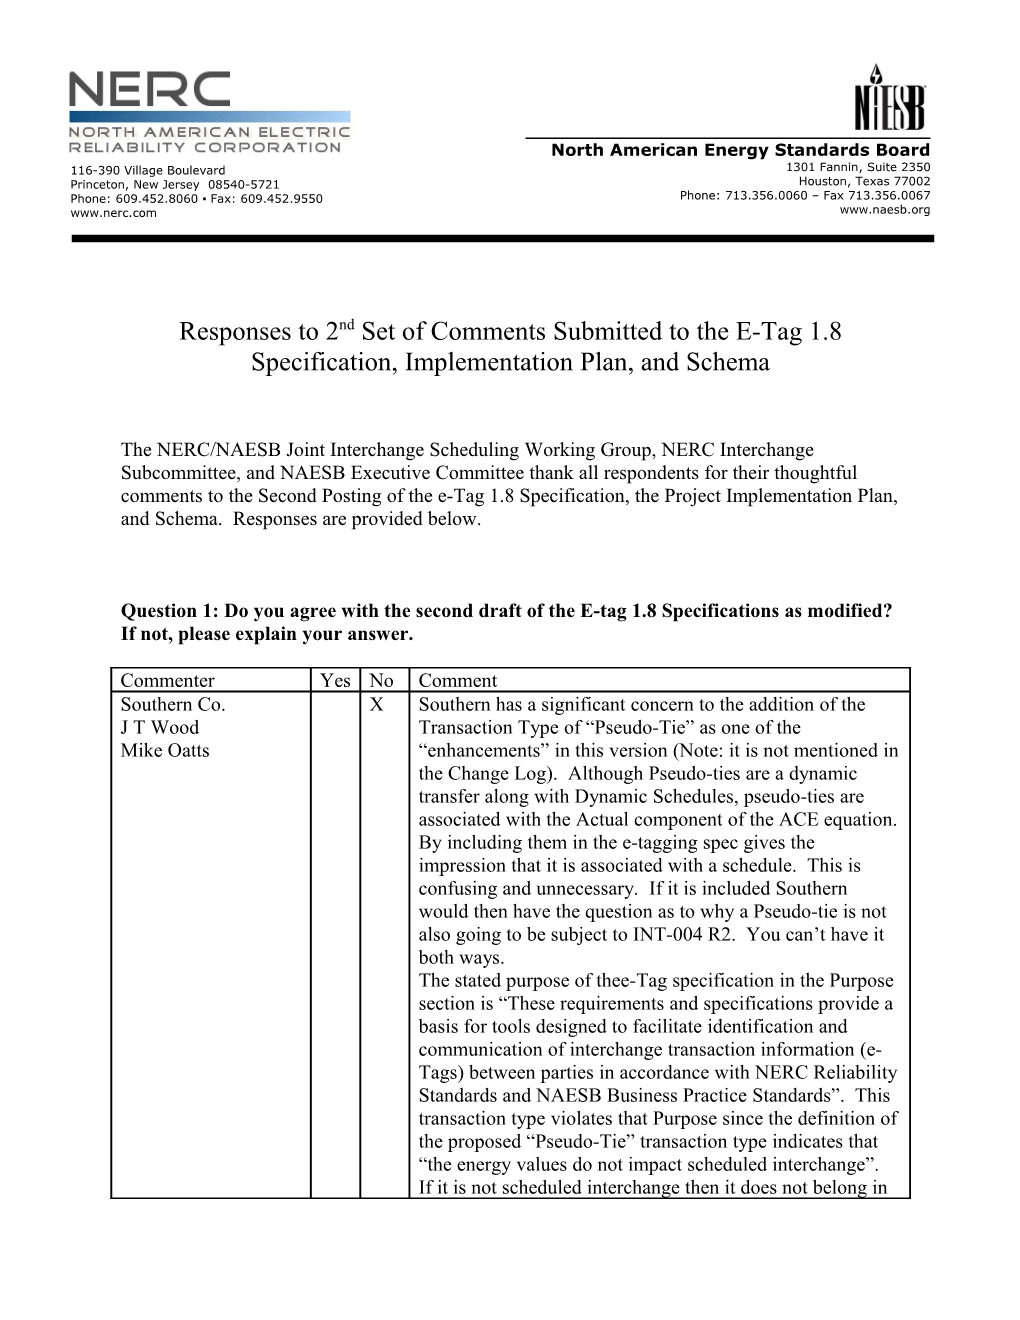 Responses to 2Nd Set of Comments Submitted to the E-Tag 1.8 Specification, Implementation